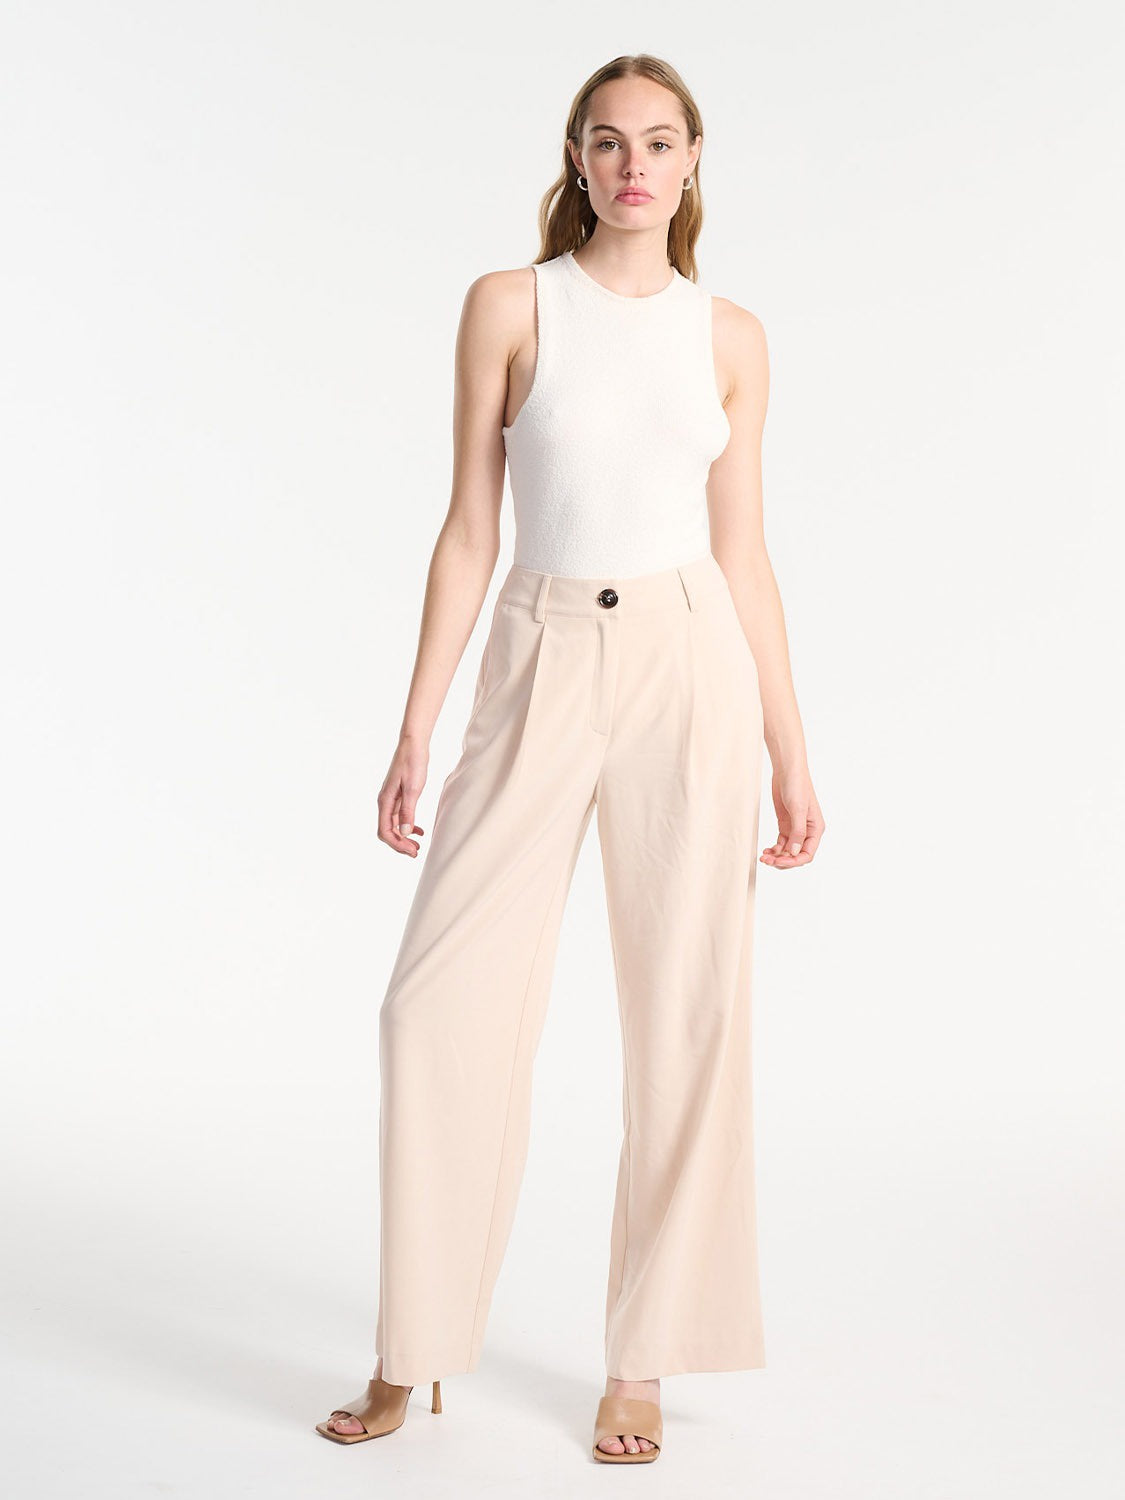 ENA PELLY | MINNIE RELAXED TROUSER - BISCUIT